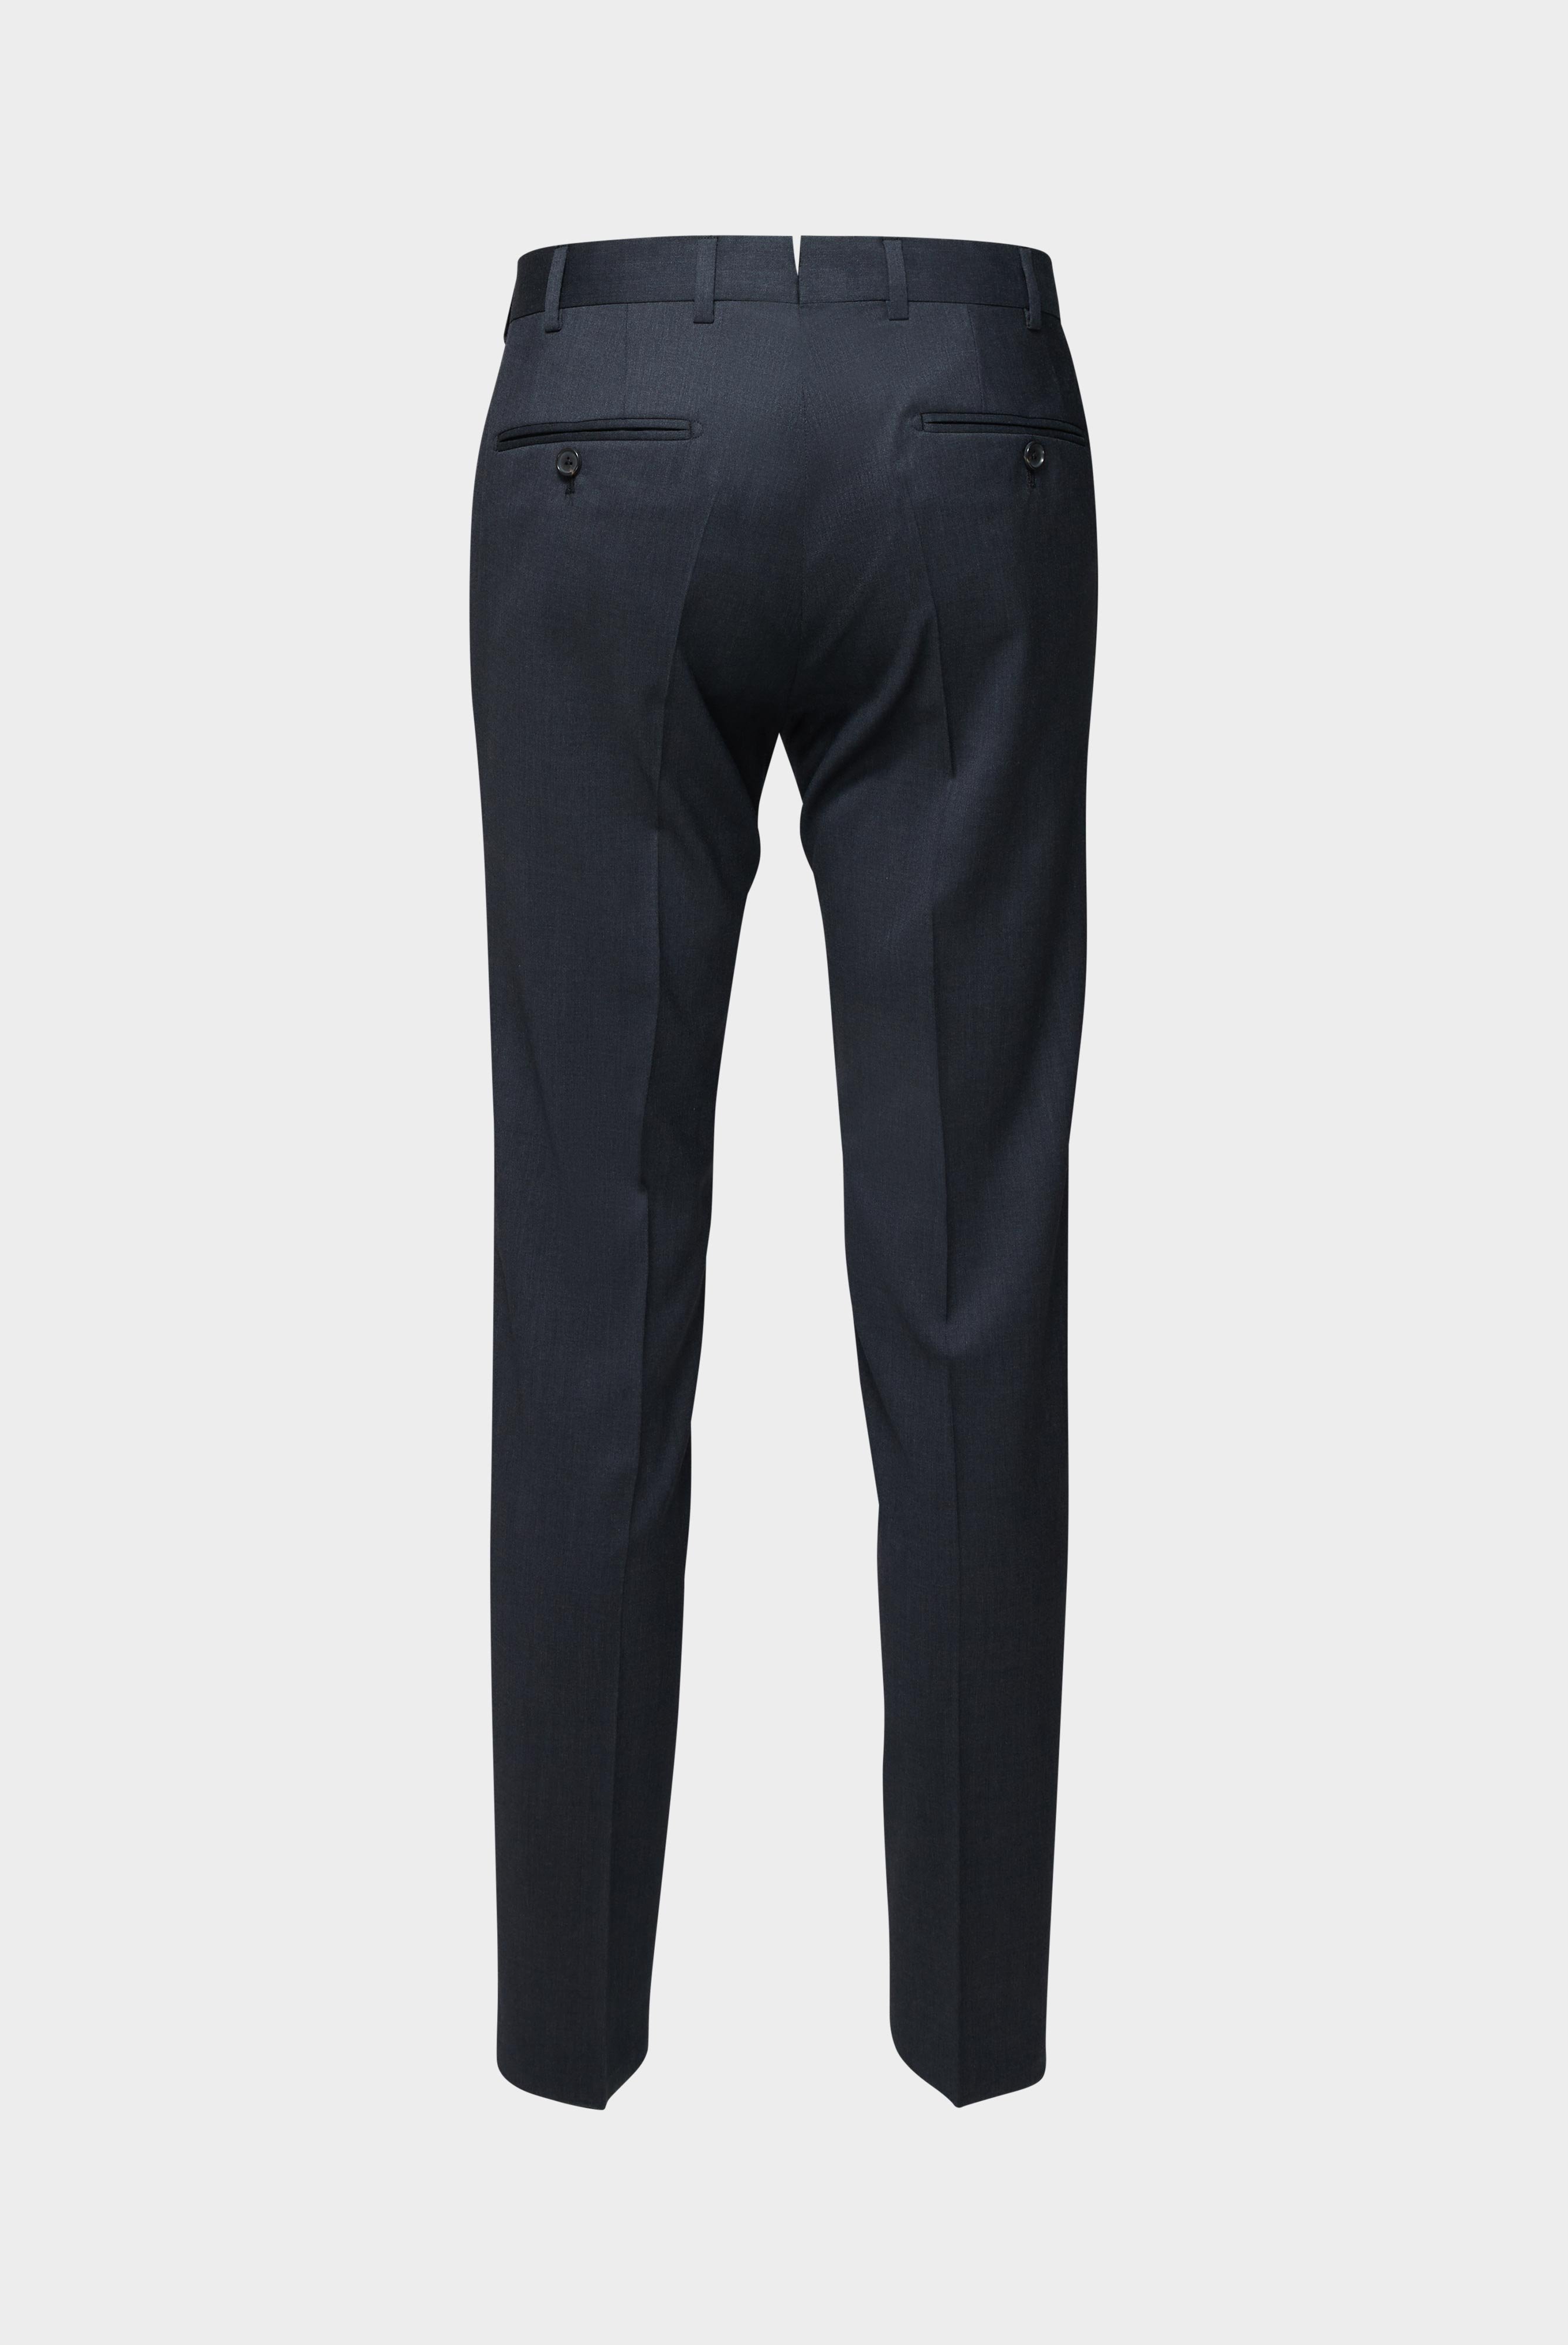 Jeans & Trousers+Wool Trousers Slim Fit+20.7880.16.H01010.090.31